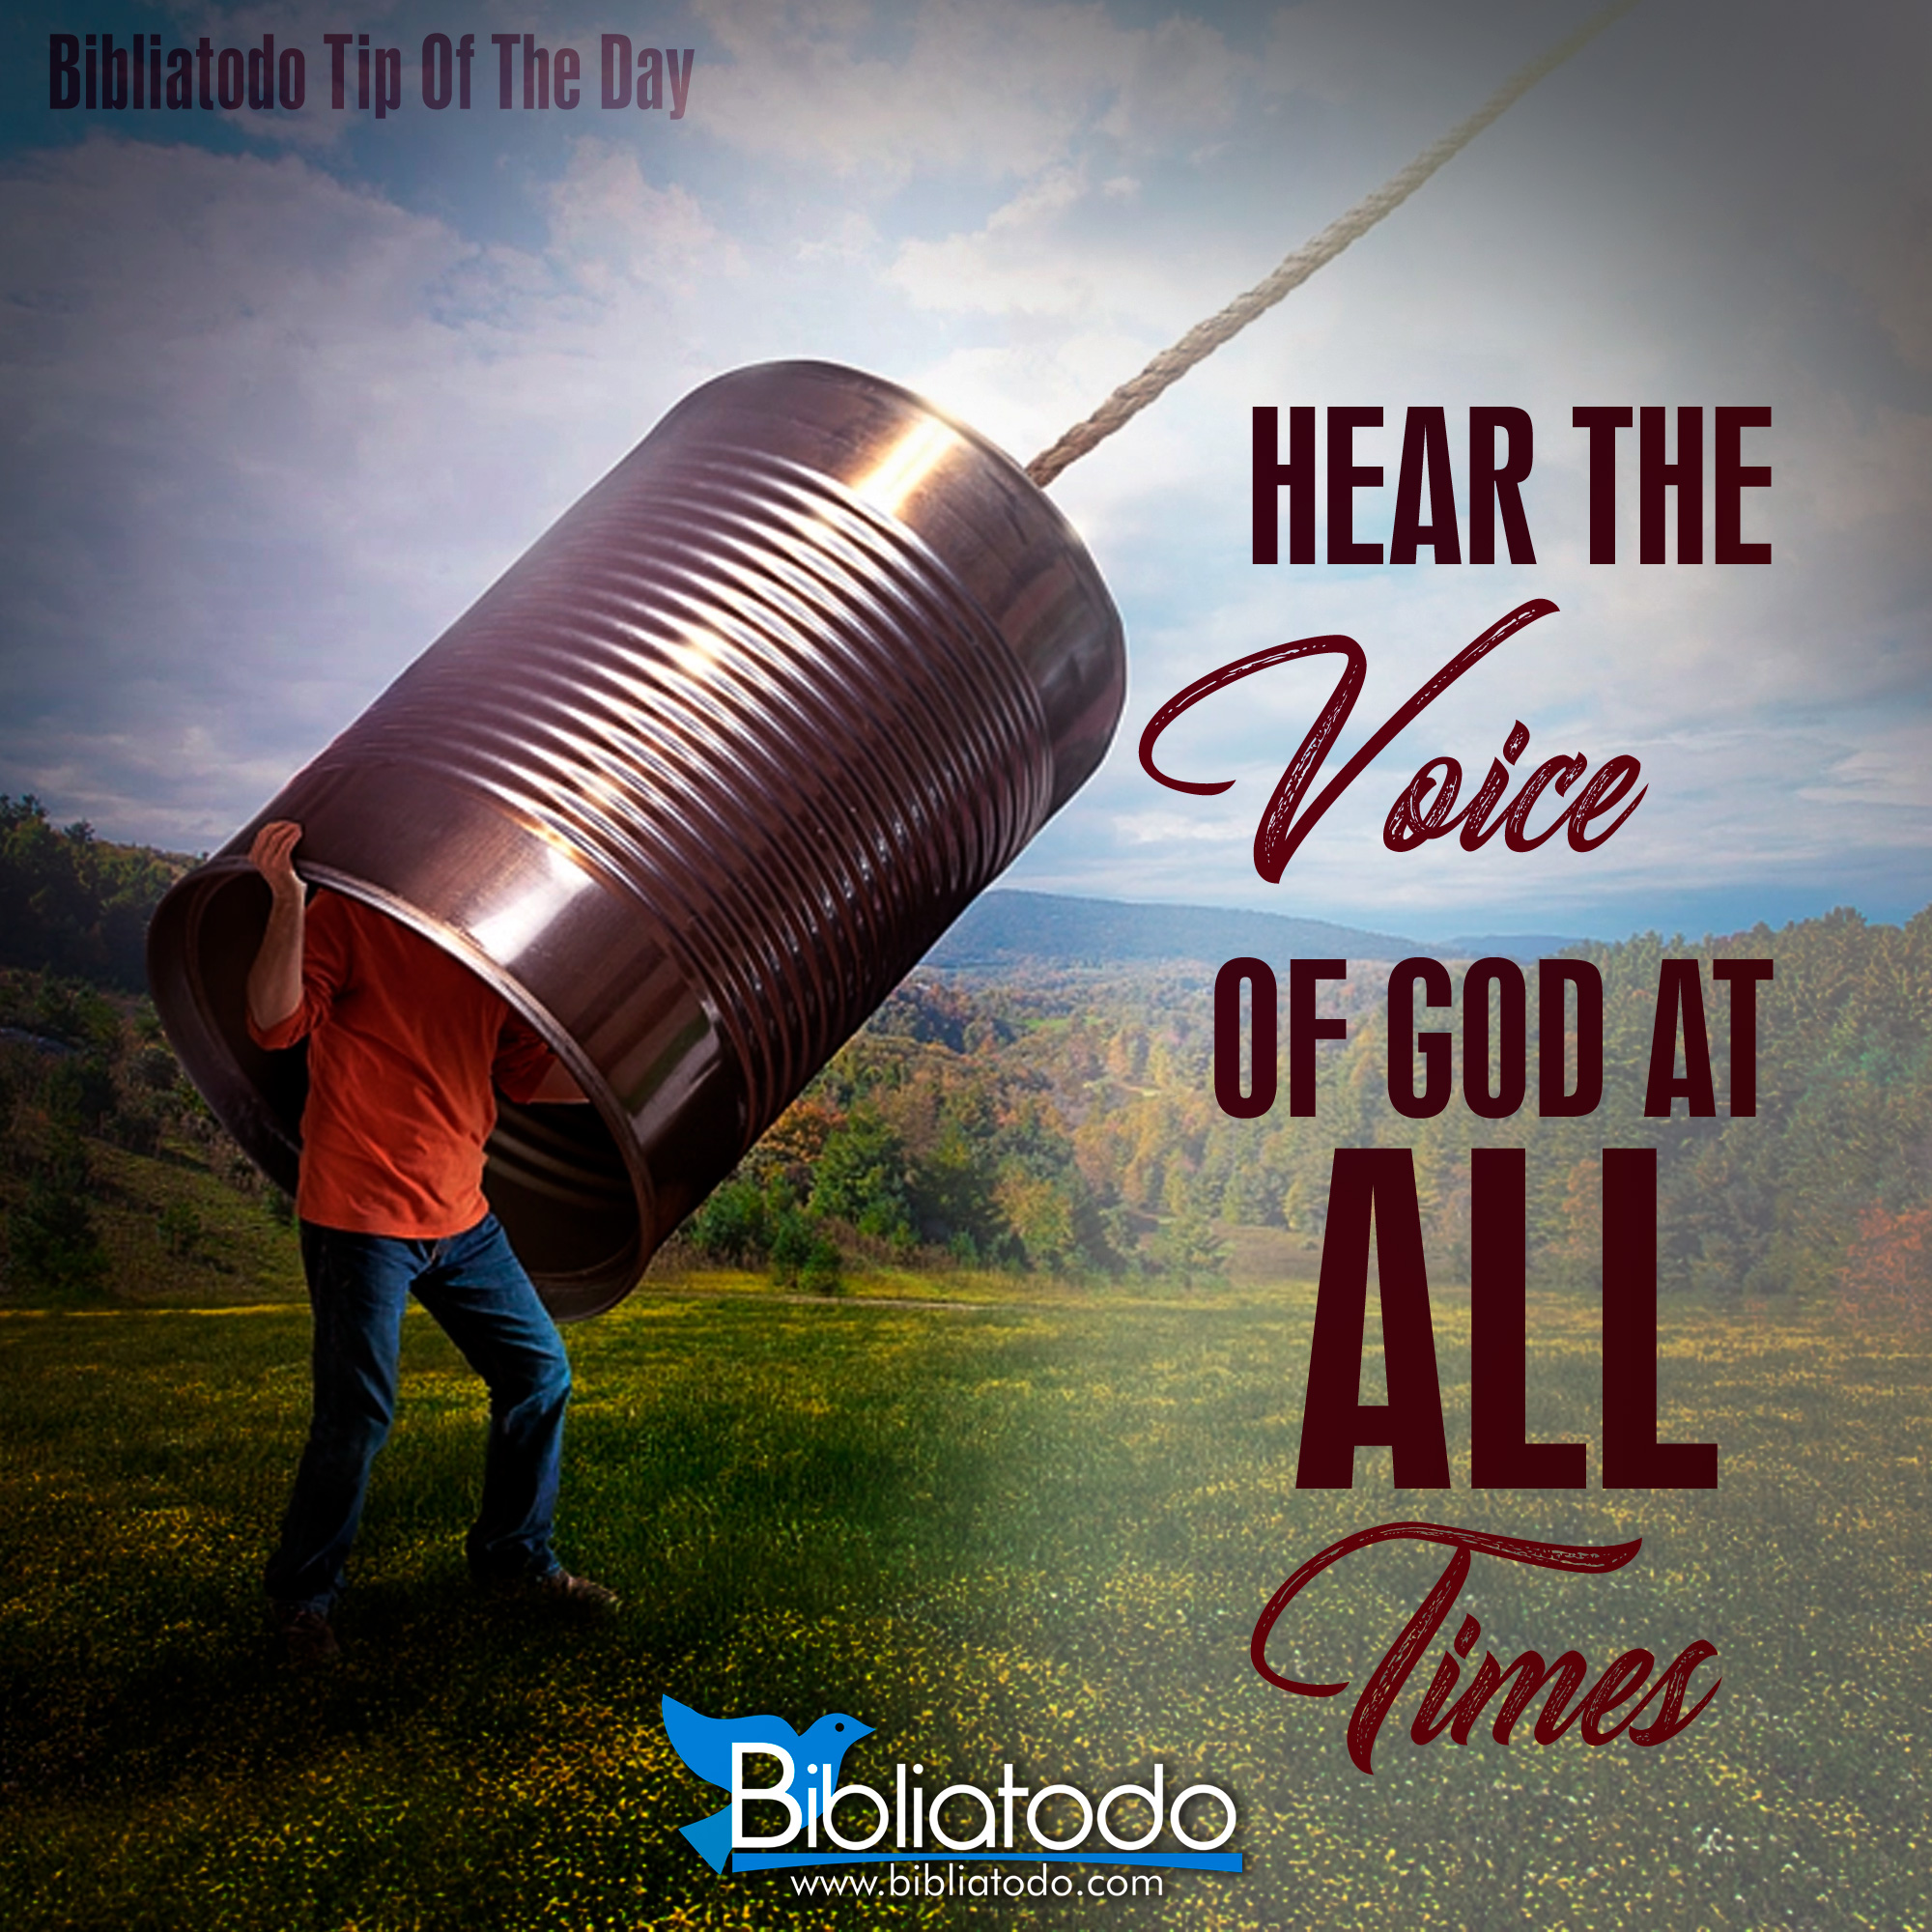 Hear the voice of God at all times - CHRISTIAN PICTURES